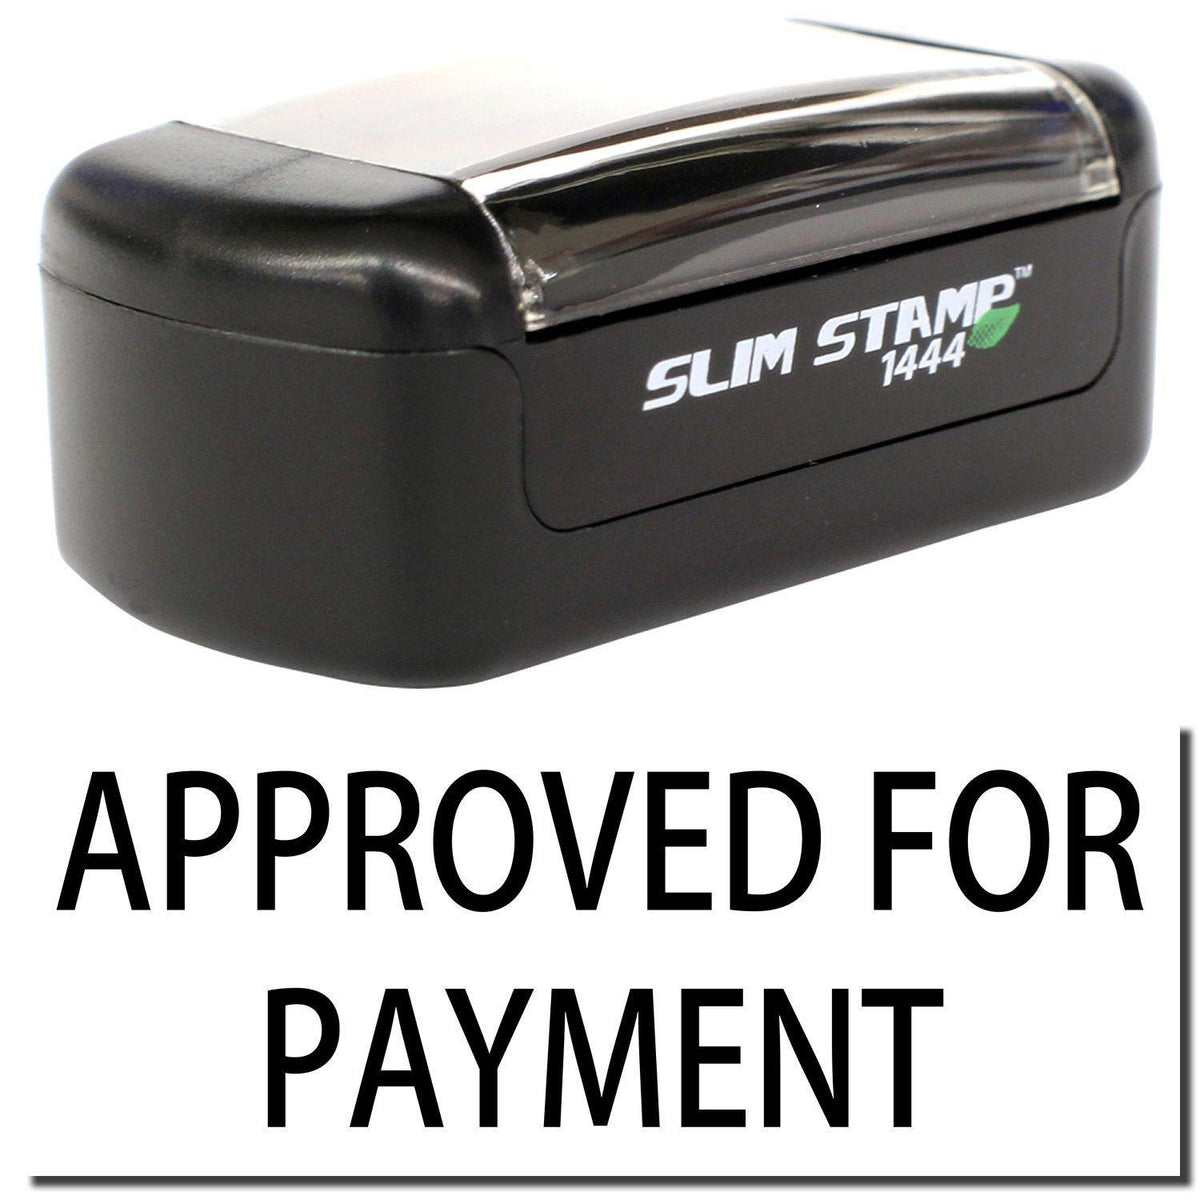 A stock office pre-inked stamp with a stamped image showing how the text &quot;APPROVED FOR PAYMENT&quot; is displayed after stamping.